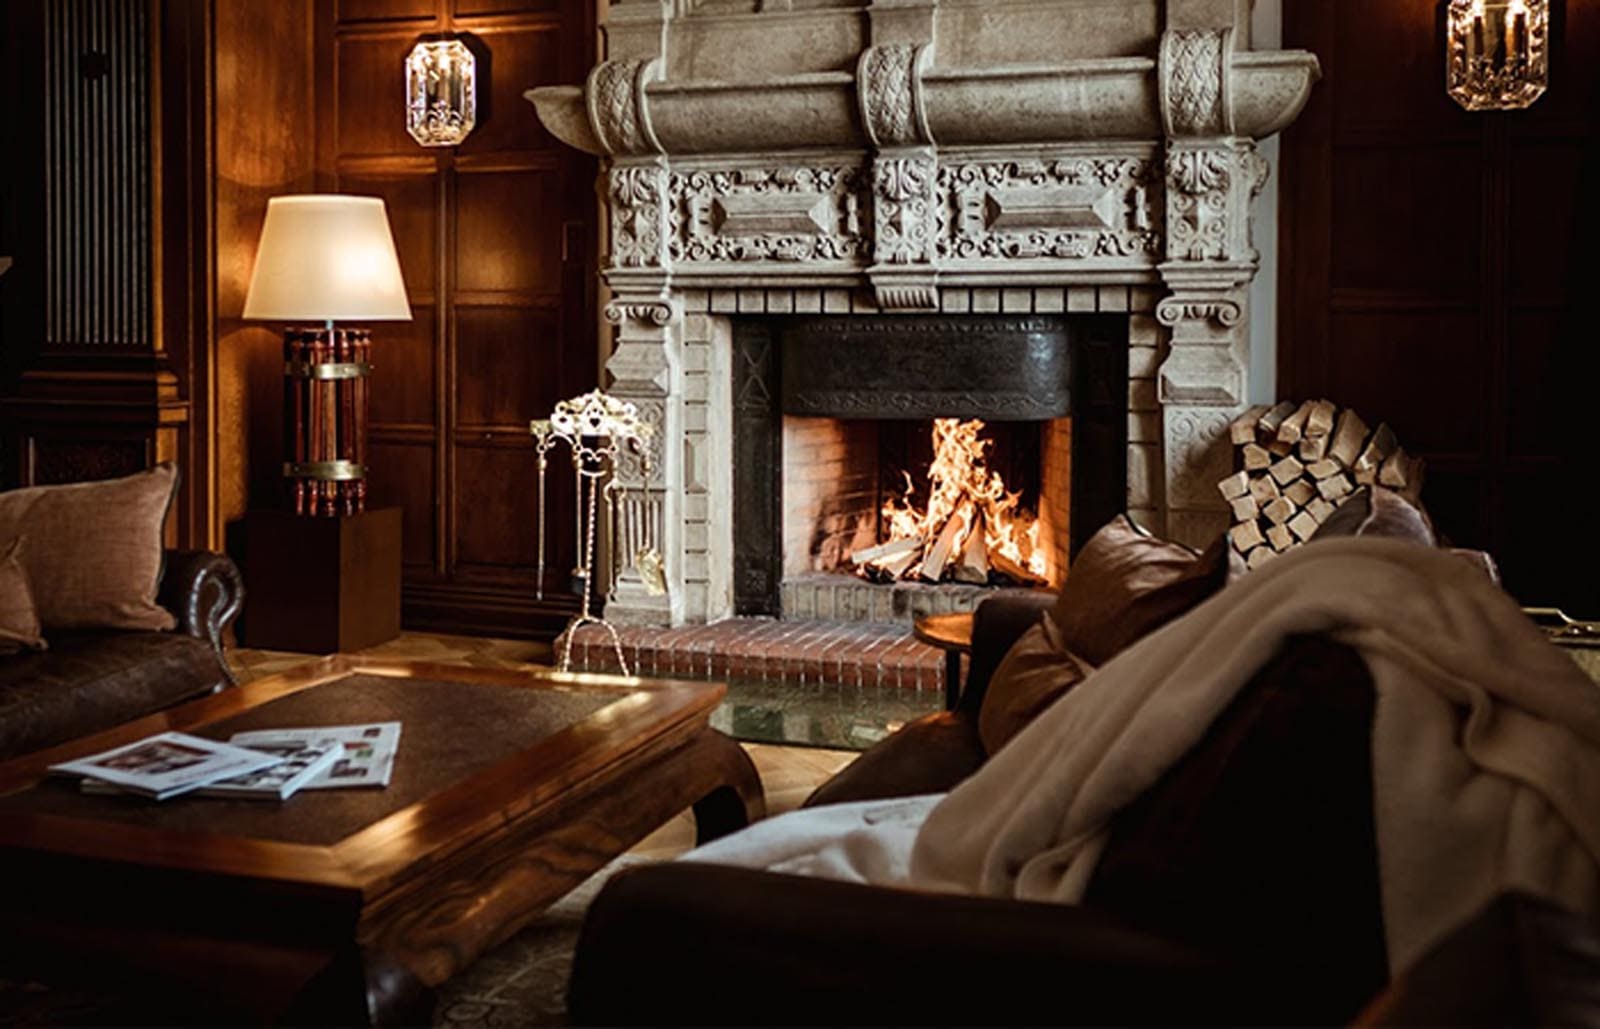 The cosy fireplace and surrounding armchairs at the Trutz in the ski resort of St. Moritz